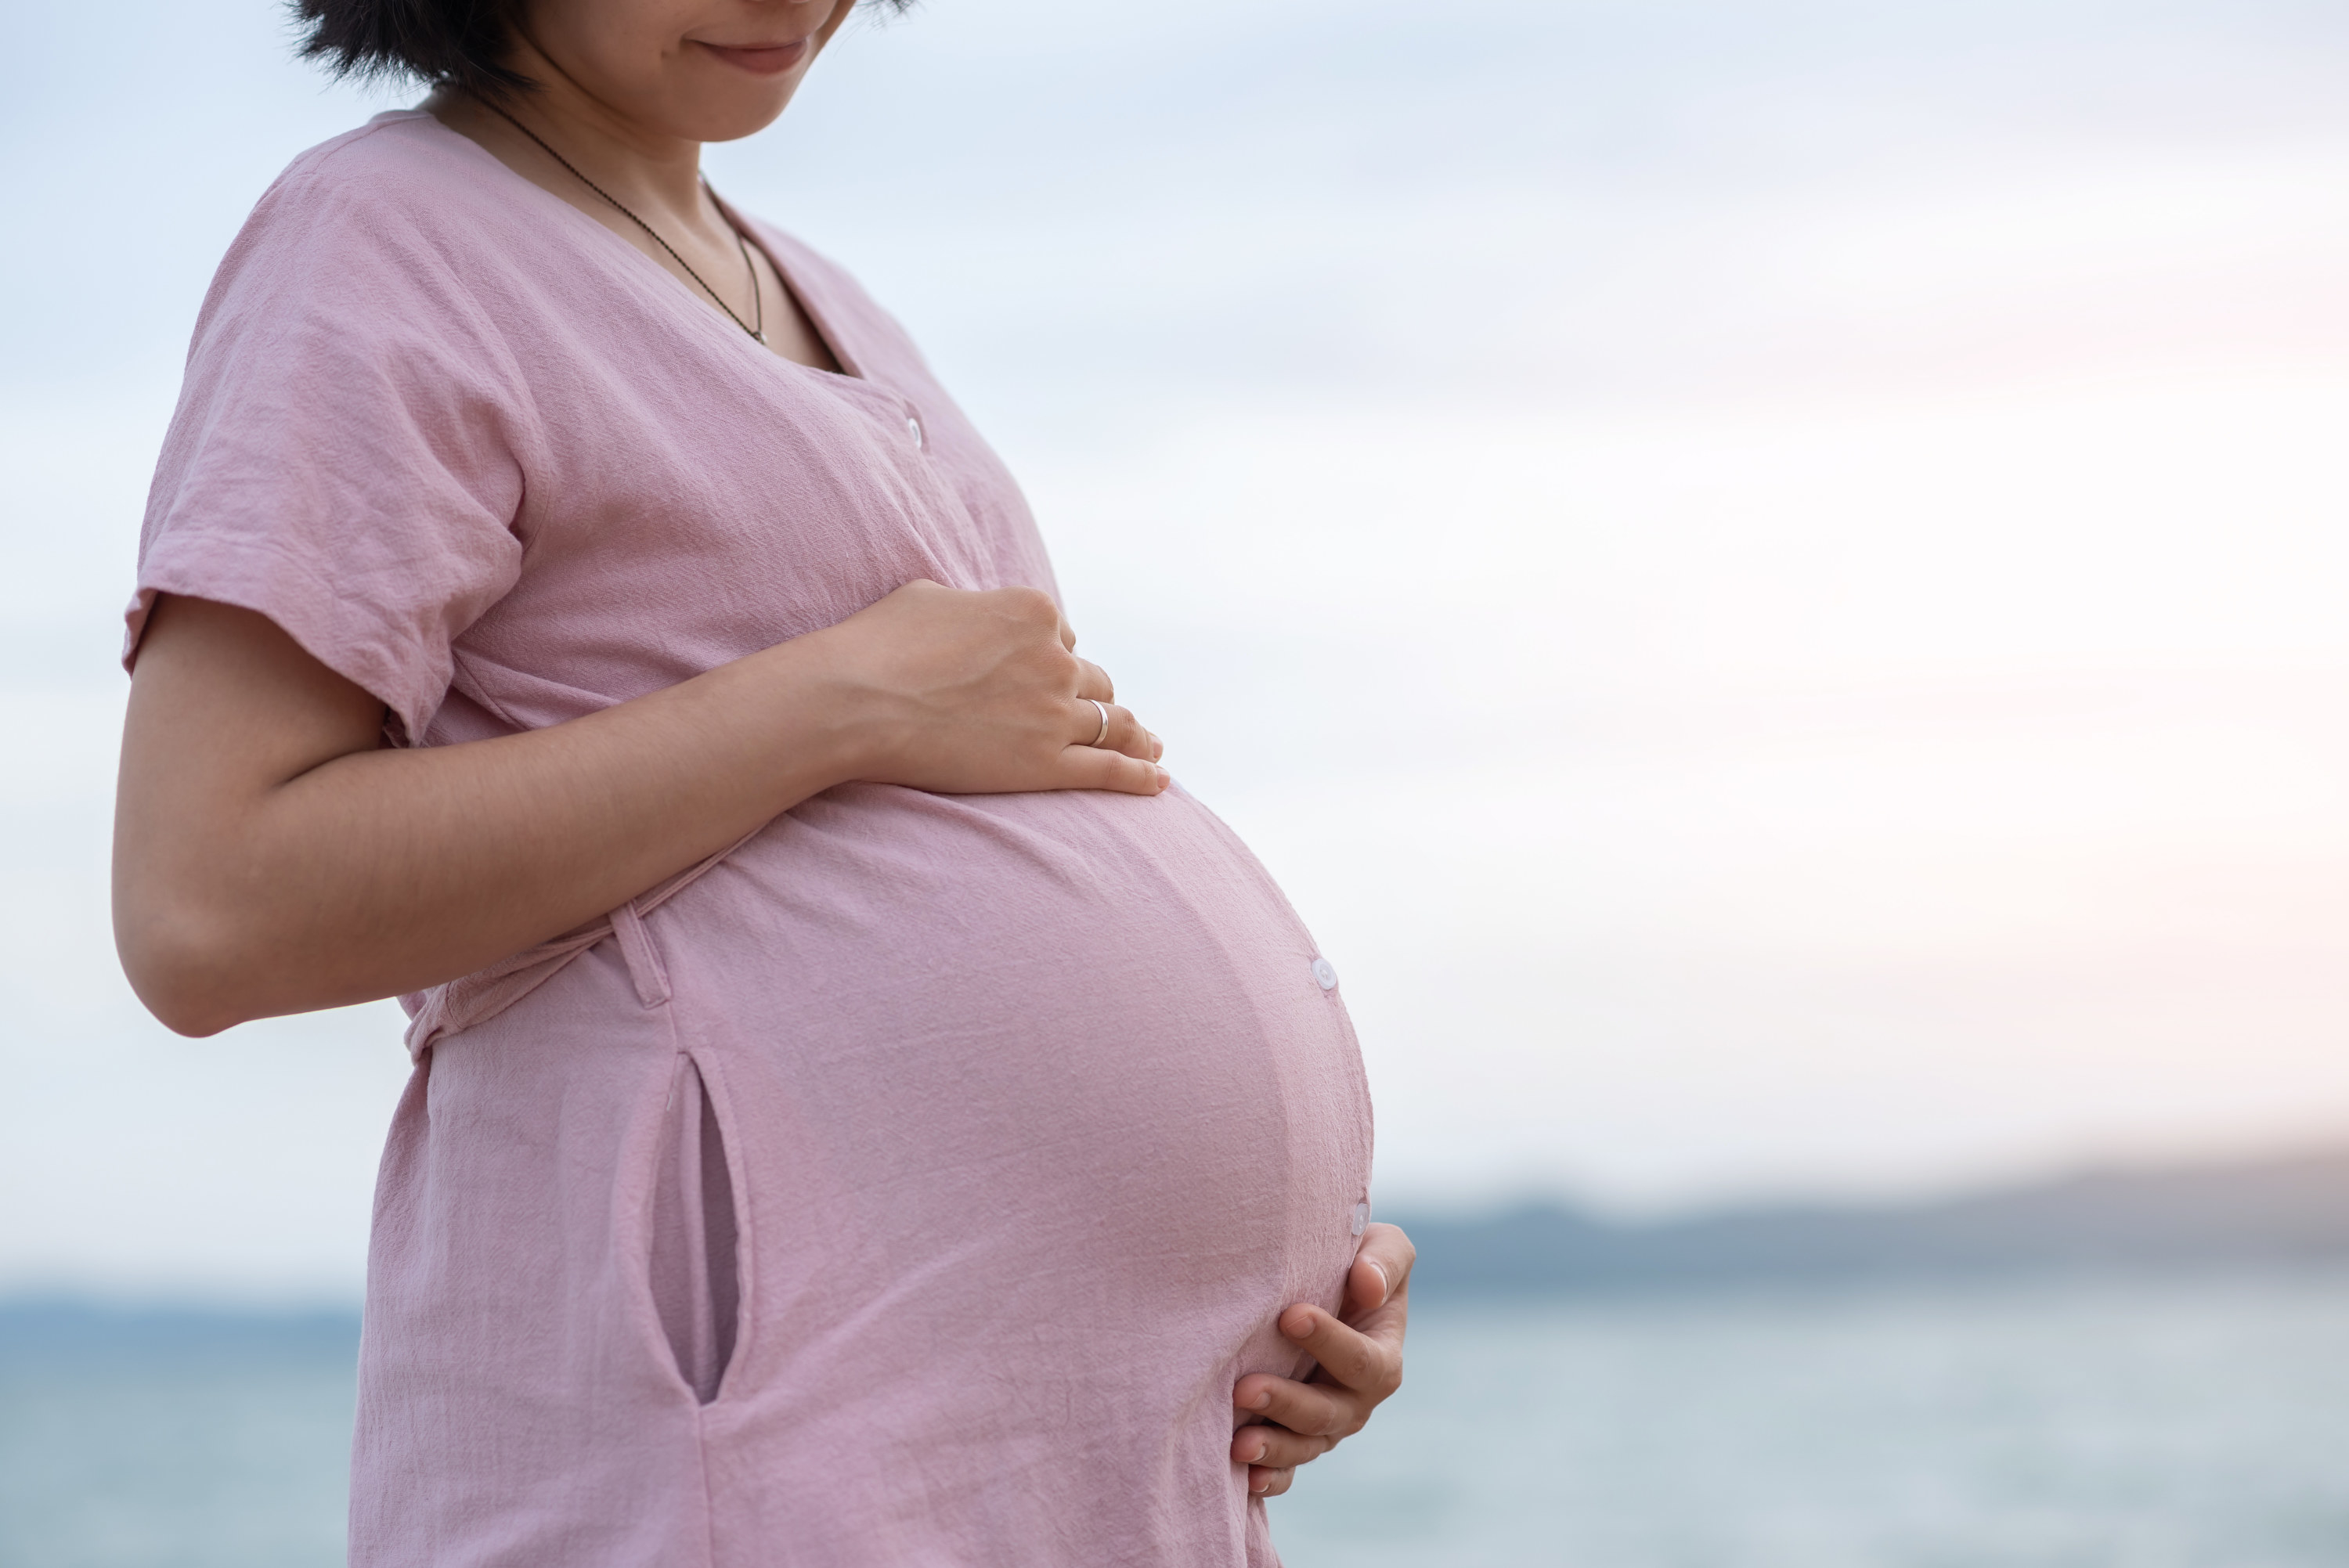 A pregnant Asian woman holding her stomach